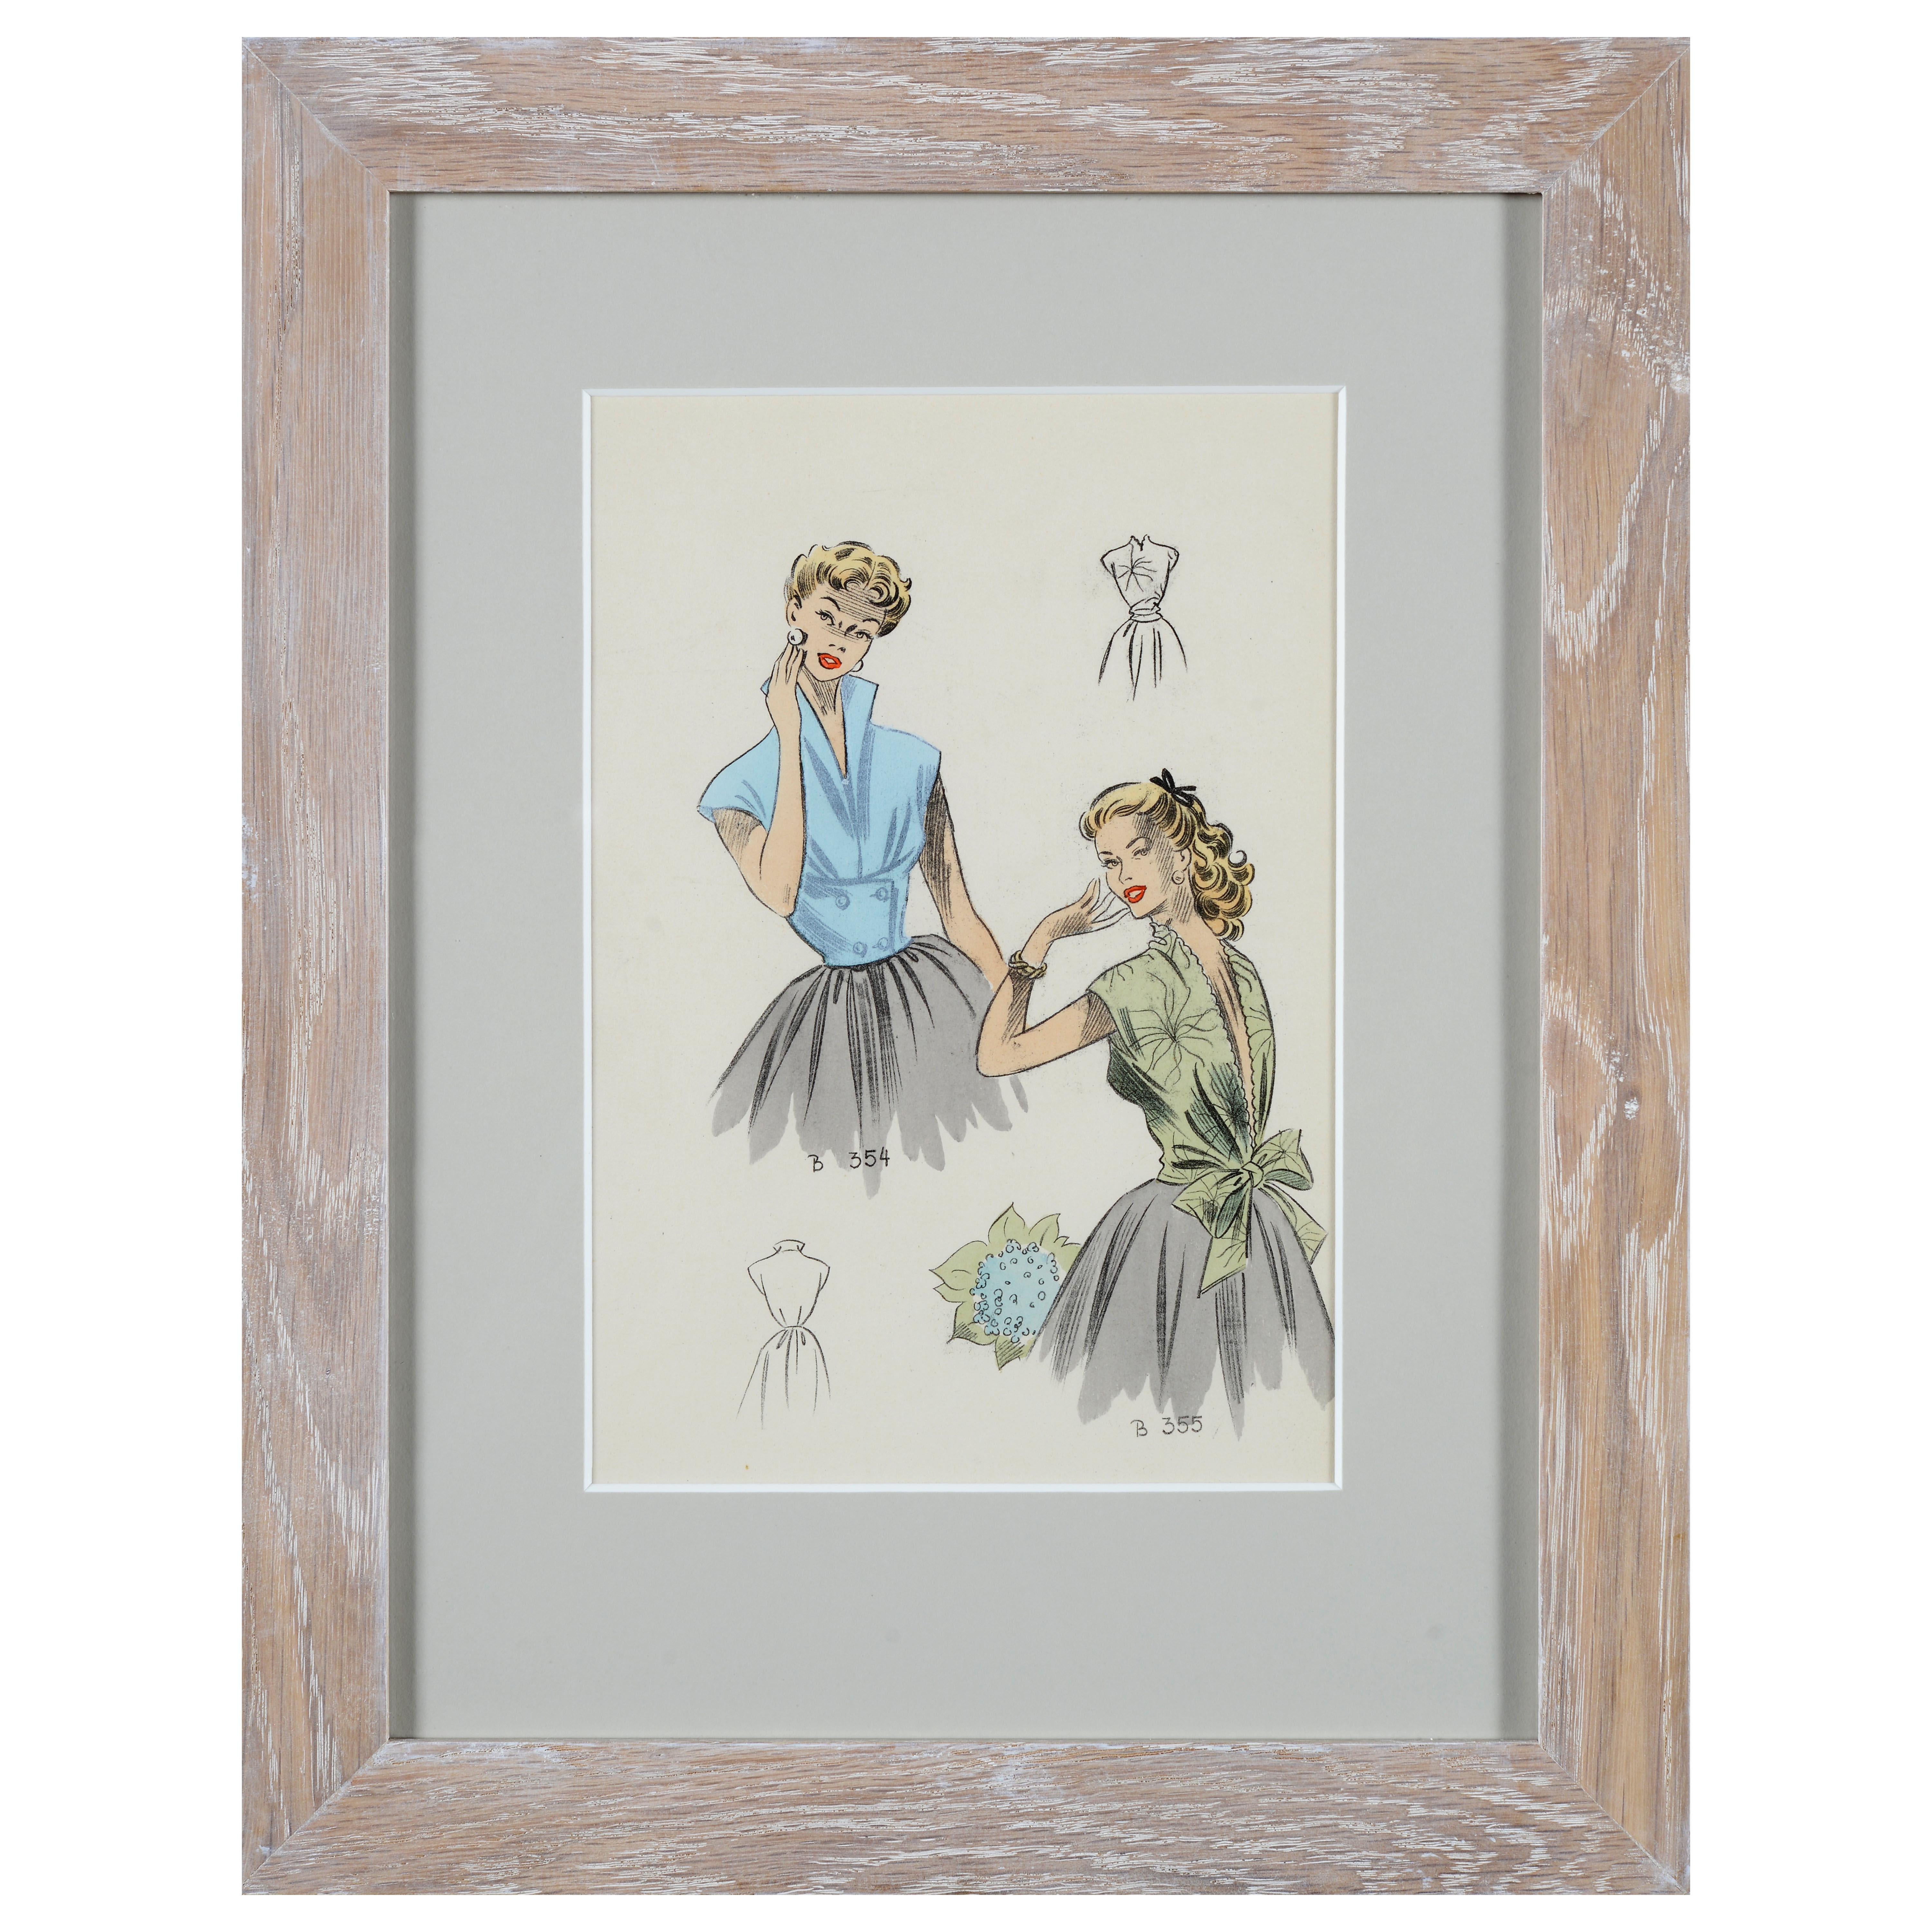 A set of 8 1950's vintage French fashion prints
Vintage Blouses Exquisites (exquisite), the Summer collection of 1954 for Mode Studio of Paris
Colour lithographs, now framed and glazed in new limed oak frames. 

21cm H, 15cm W (within mount)
37cm H,